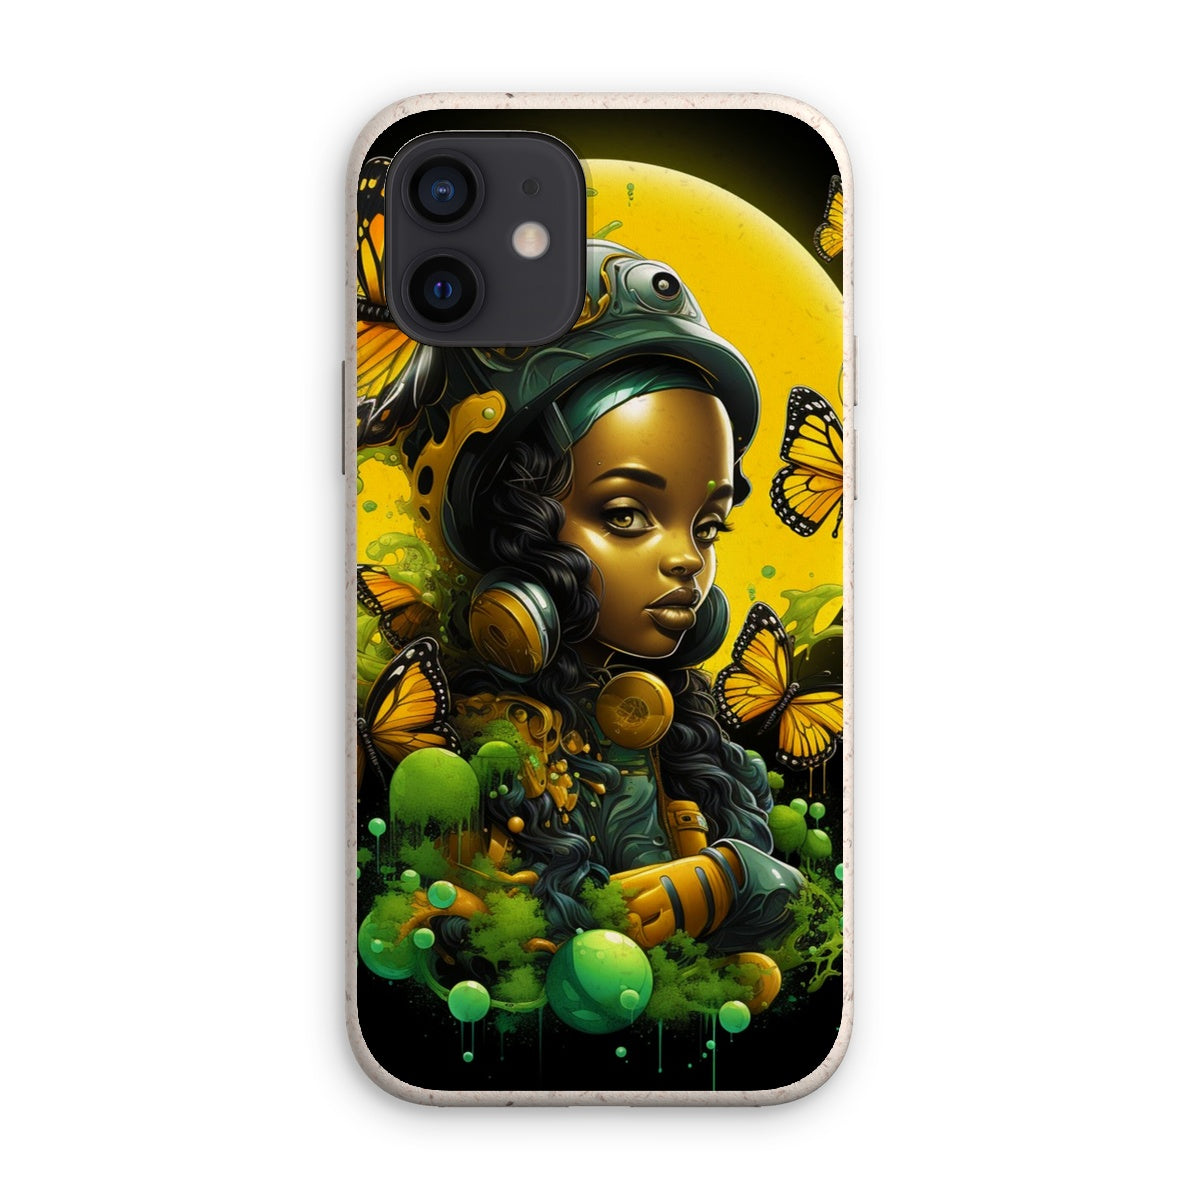 Monarch Butterfly Urban Fantasy Art Print - Afrofuturistic Girl with Butterflies Eco Phone Case